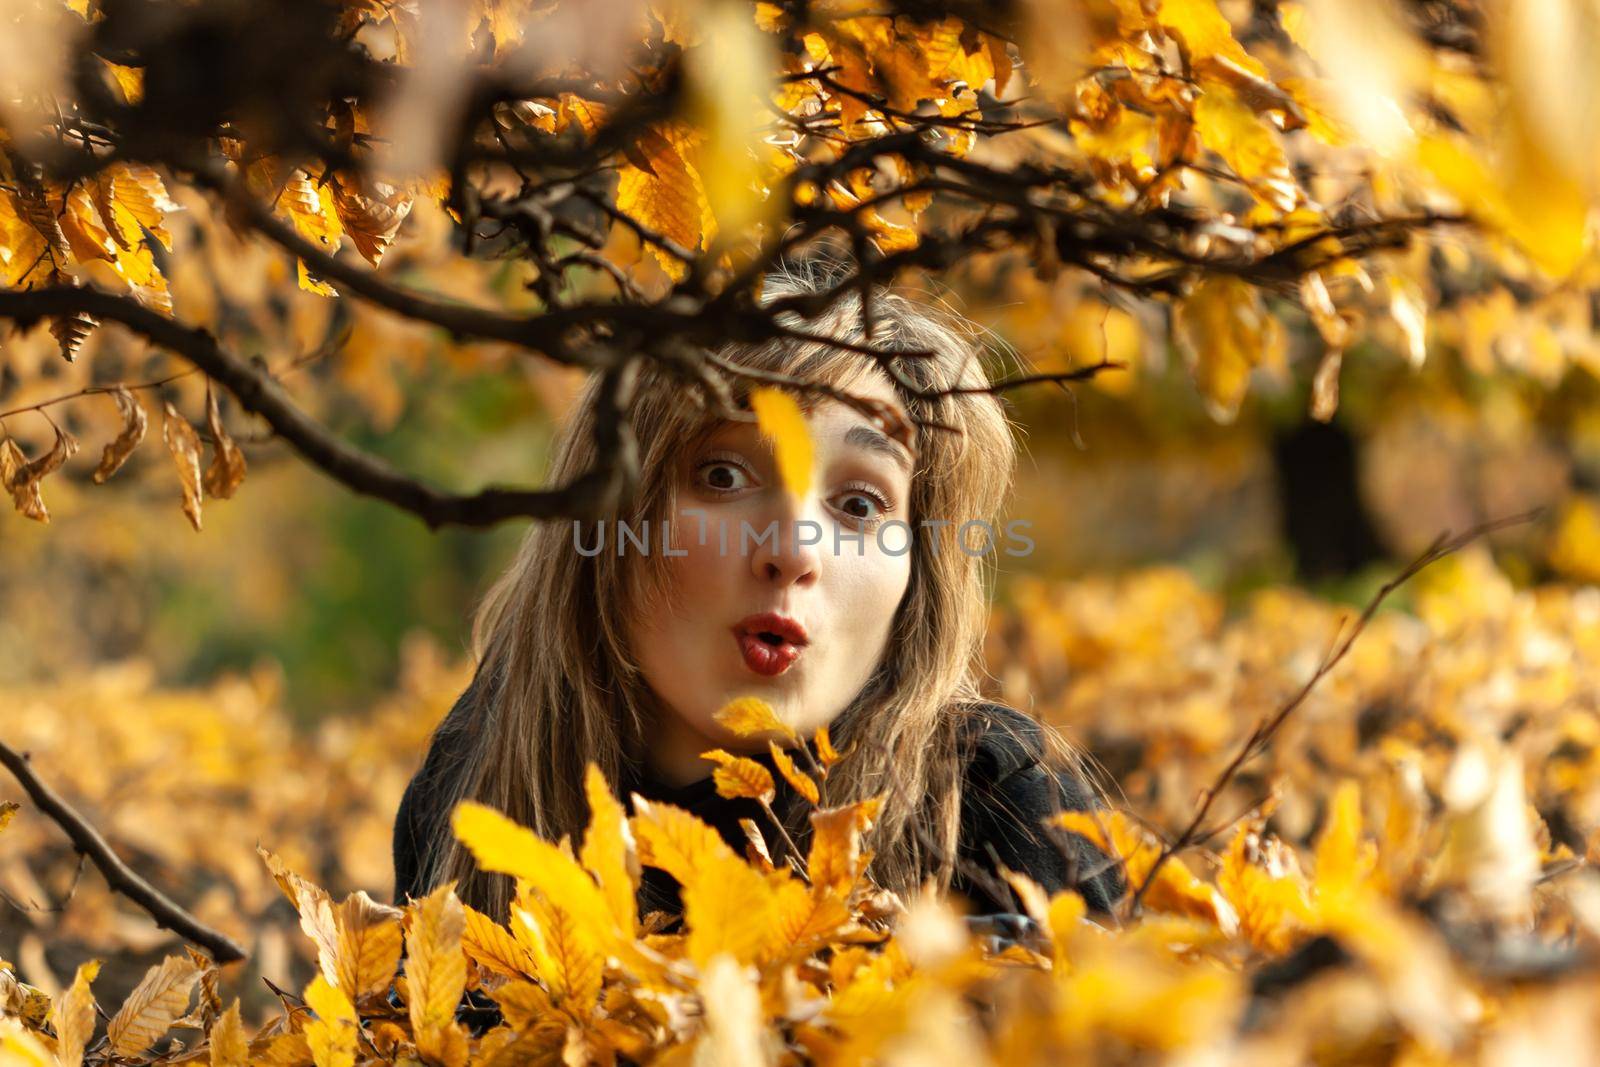 Smiling happy girl portrait with autumn leaves. Young woman among golden autumn leaves. Romantic moment in warm light. Park with yellow leaves and autumn atmosphere.